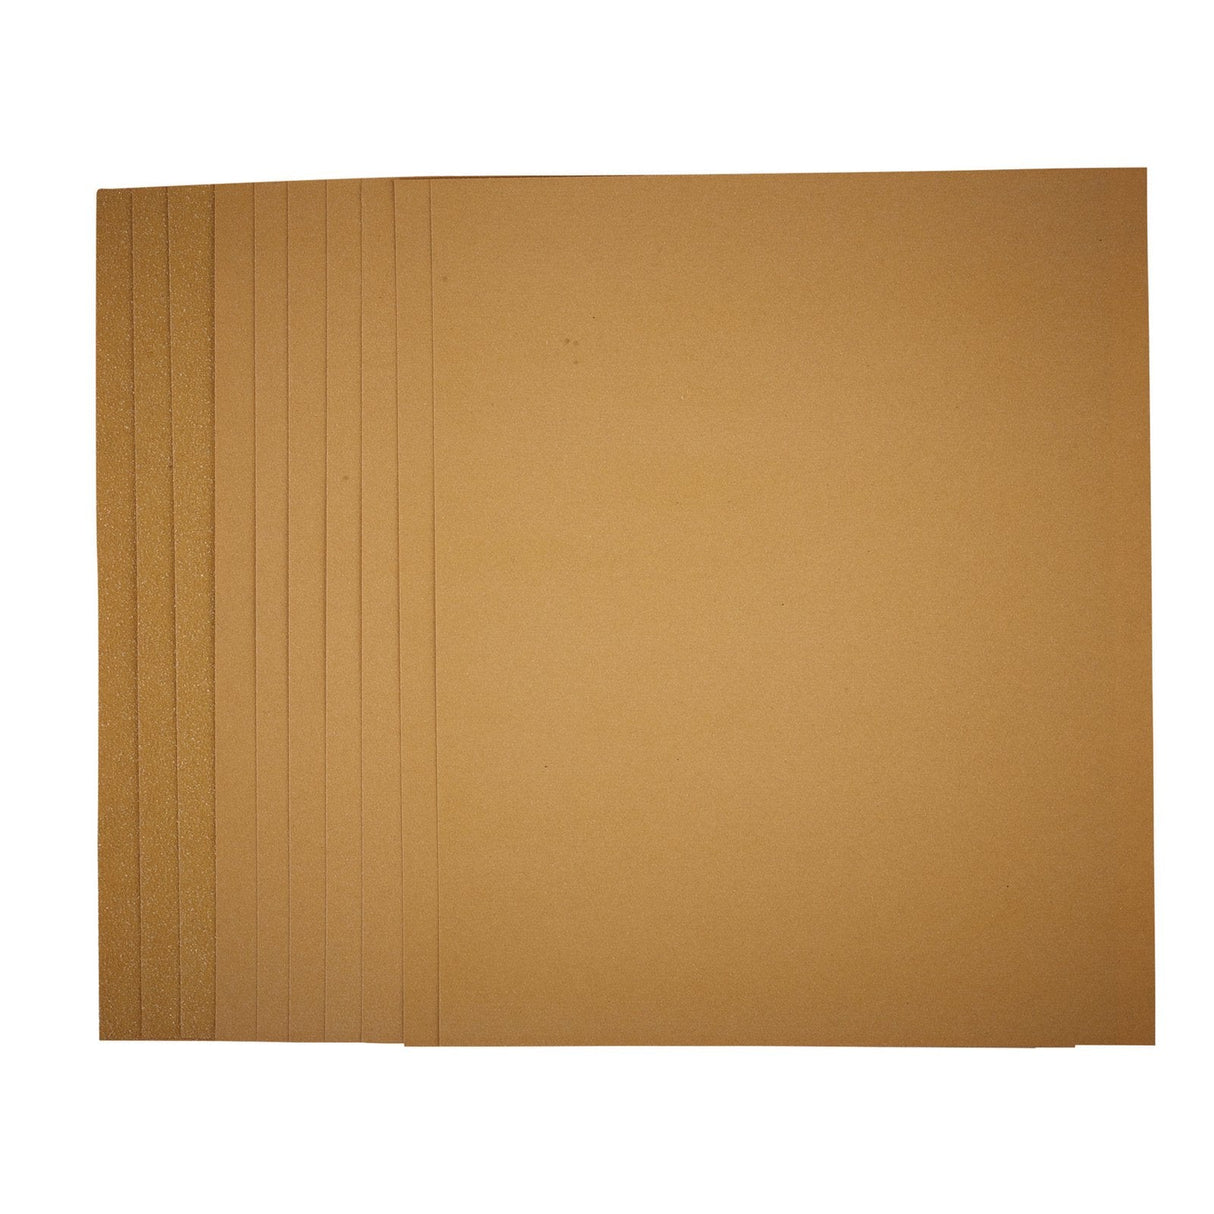 Draper General Purpose Sanding Sheets, 230 X 280mm, Assorted Grit (Pack Of 10) - HSSG - Farming Parts